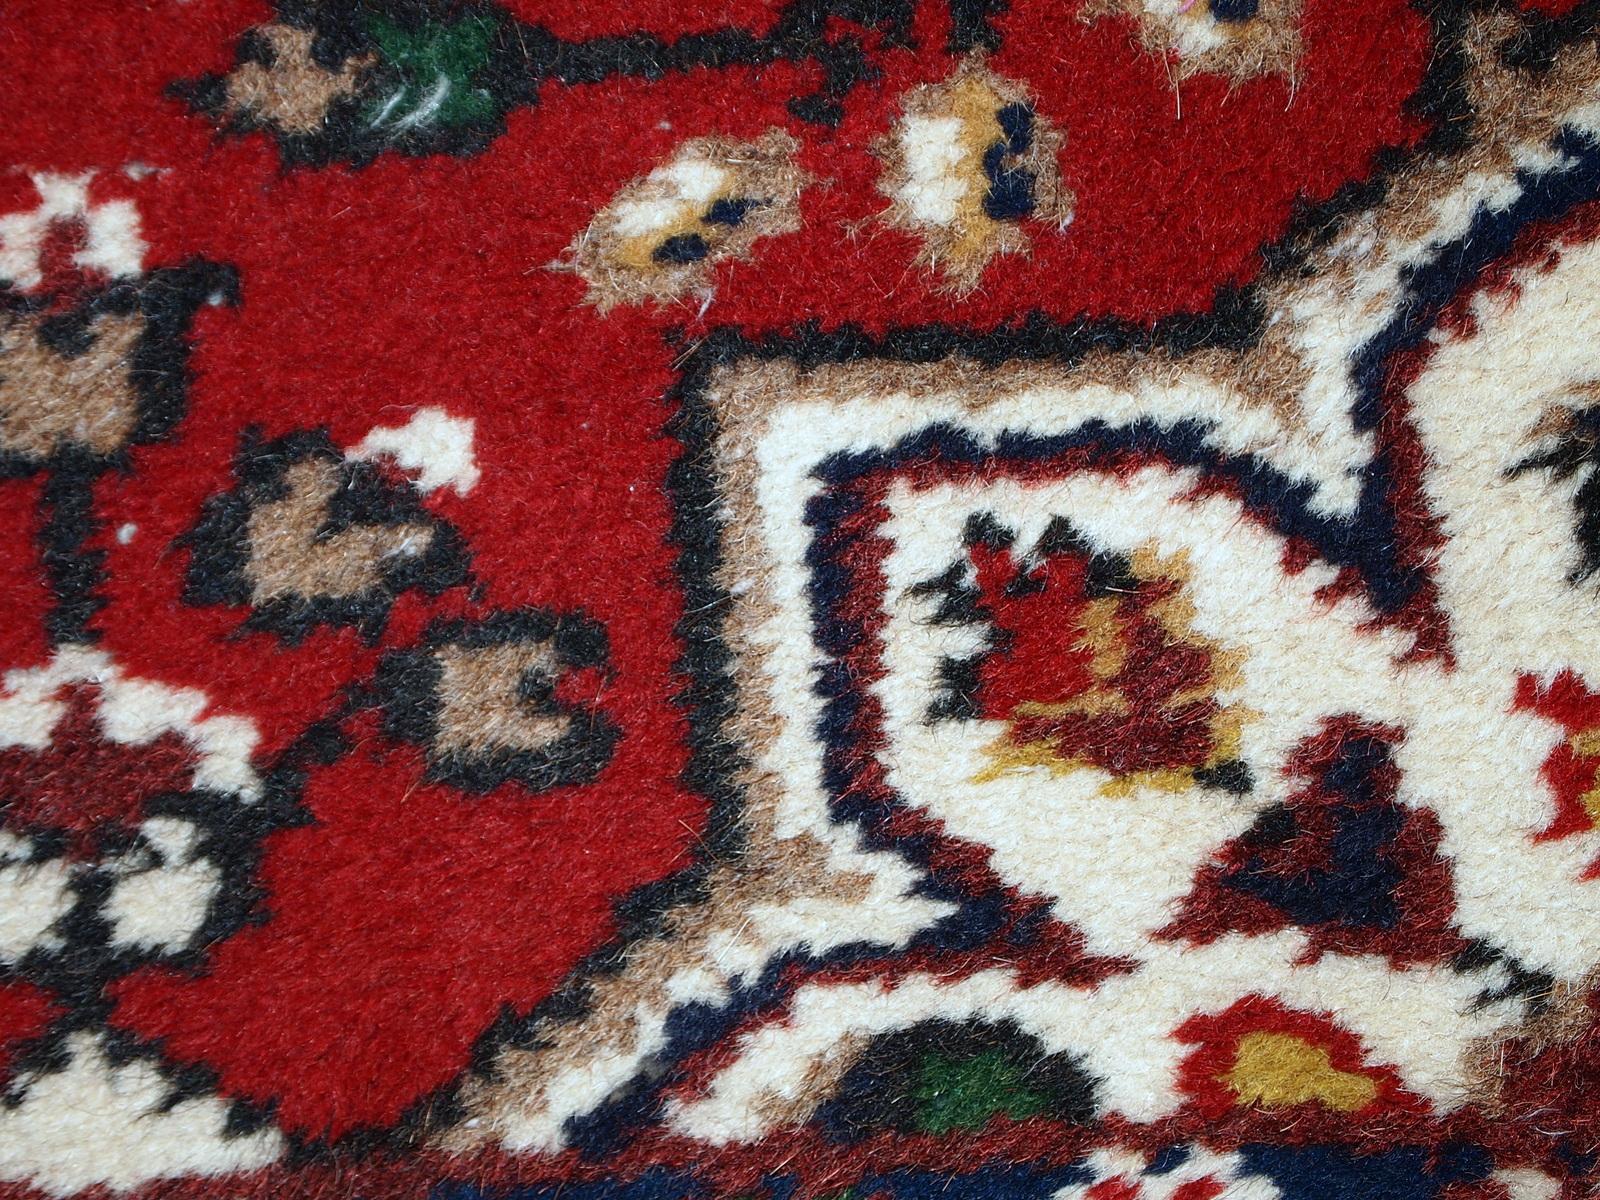 Handmade vintage Hamadan rug in bright red shade. The rug is in original good condition from the end of 20th century.

?-Condition: original good,

-circa: 1970s,

-Size: 2' x 3' (62cm x 91cm),

-Material: wool,

-Country of origin: Middle